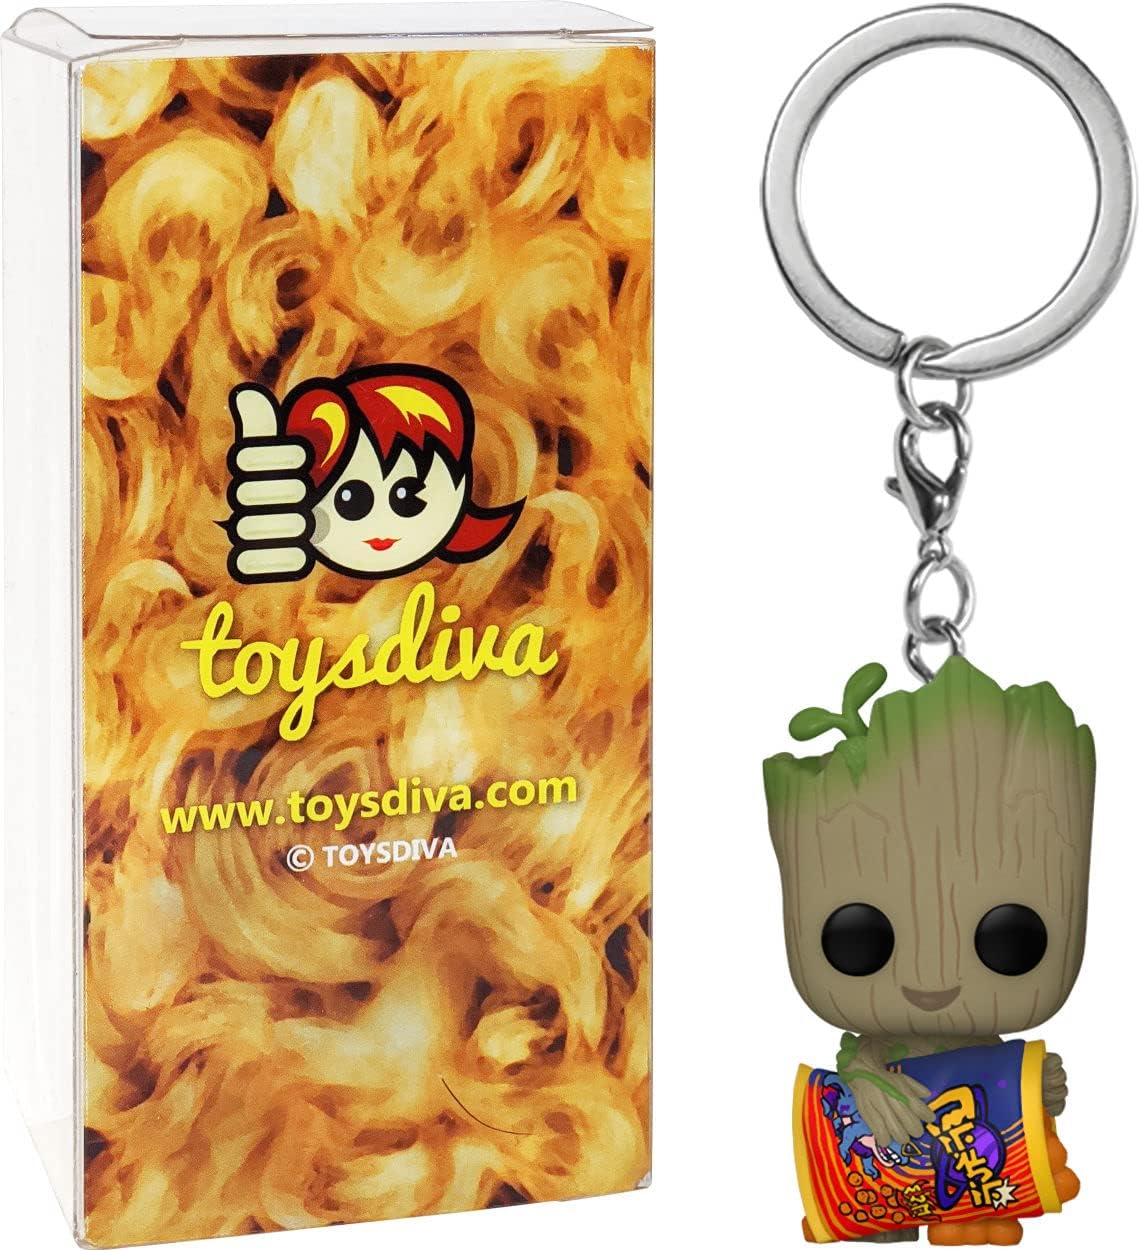 G r o o t with Cheese Puffs: Pocket P o p ! Mini-Figural K e y c h a i n Bundle with 1 Compatible 'ToysDiva' Graphic Protector